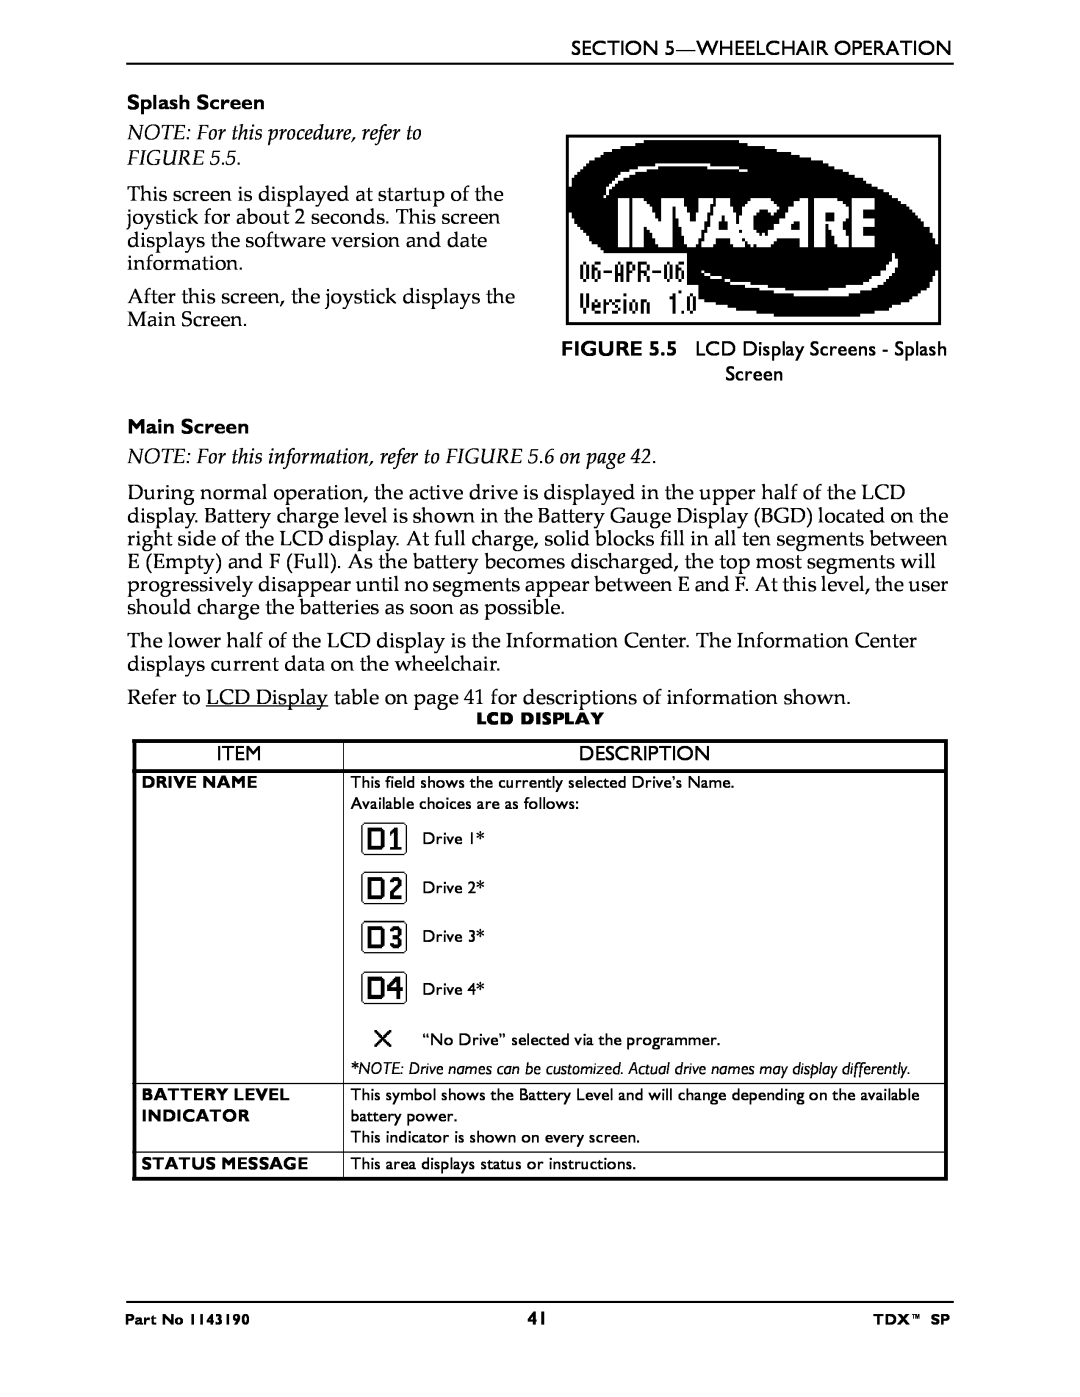 Invacare SP Splash Screen, NOTE For this procedure, refer to, Main Screen, NOTE For this information, refer to .6 on page 